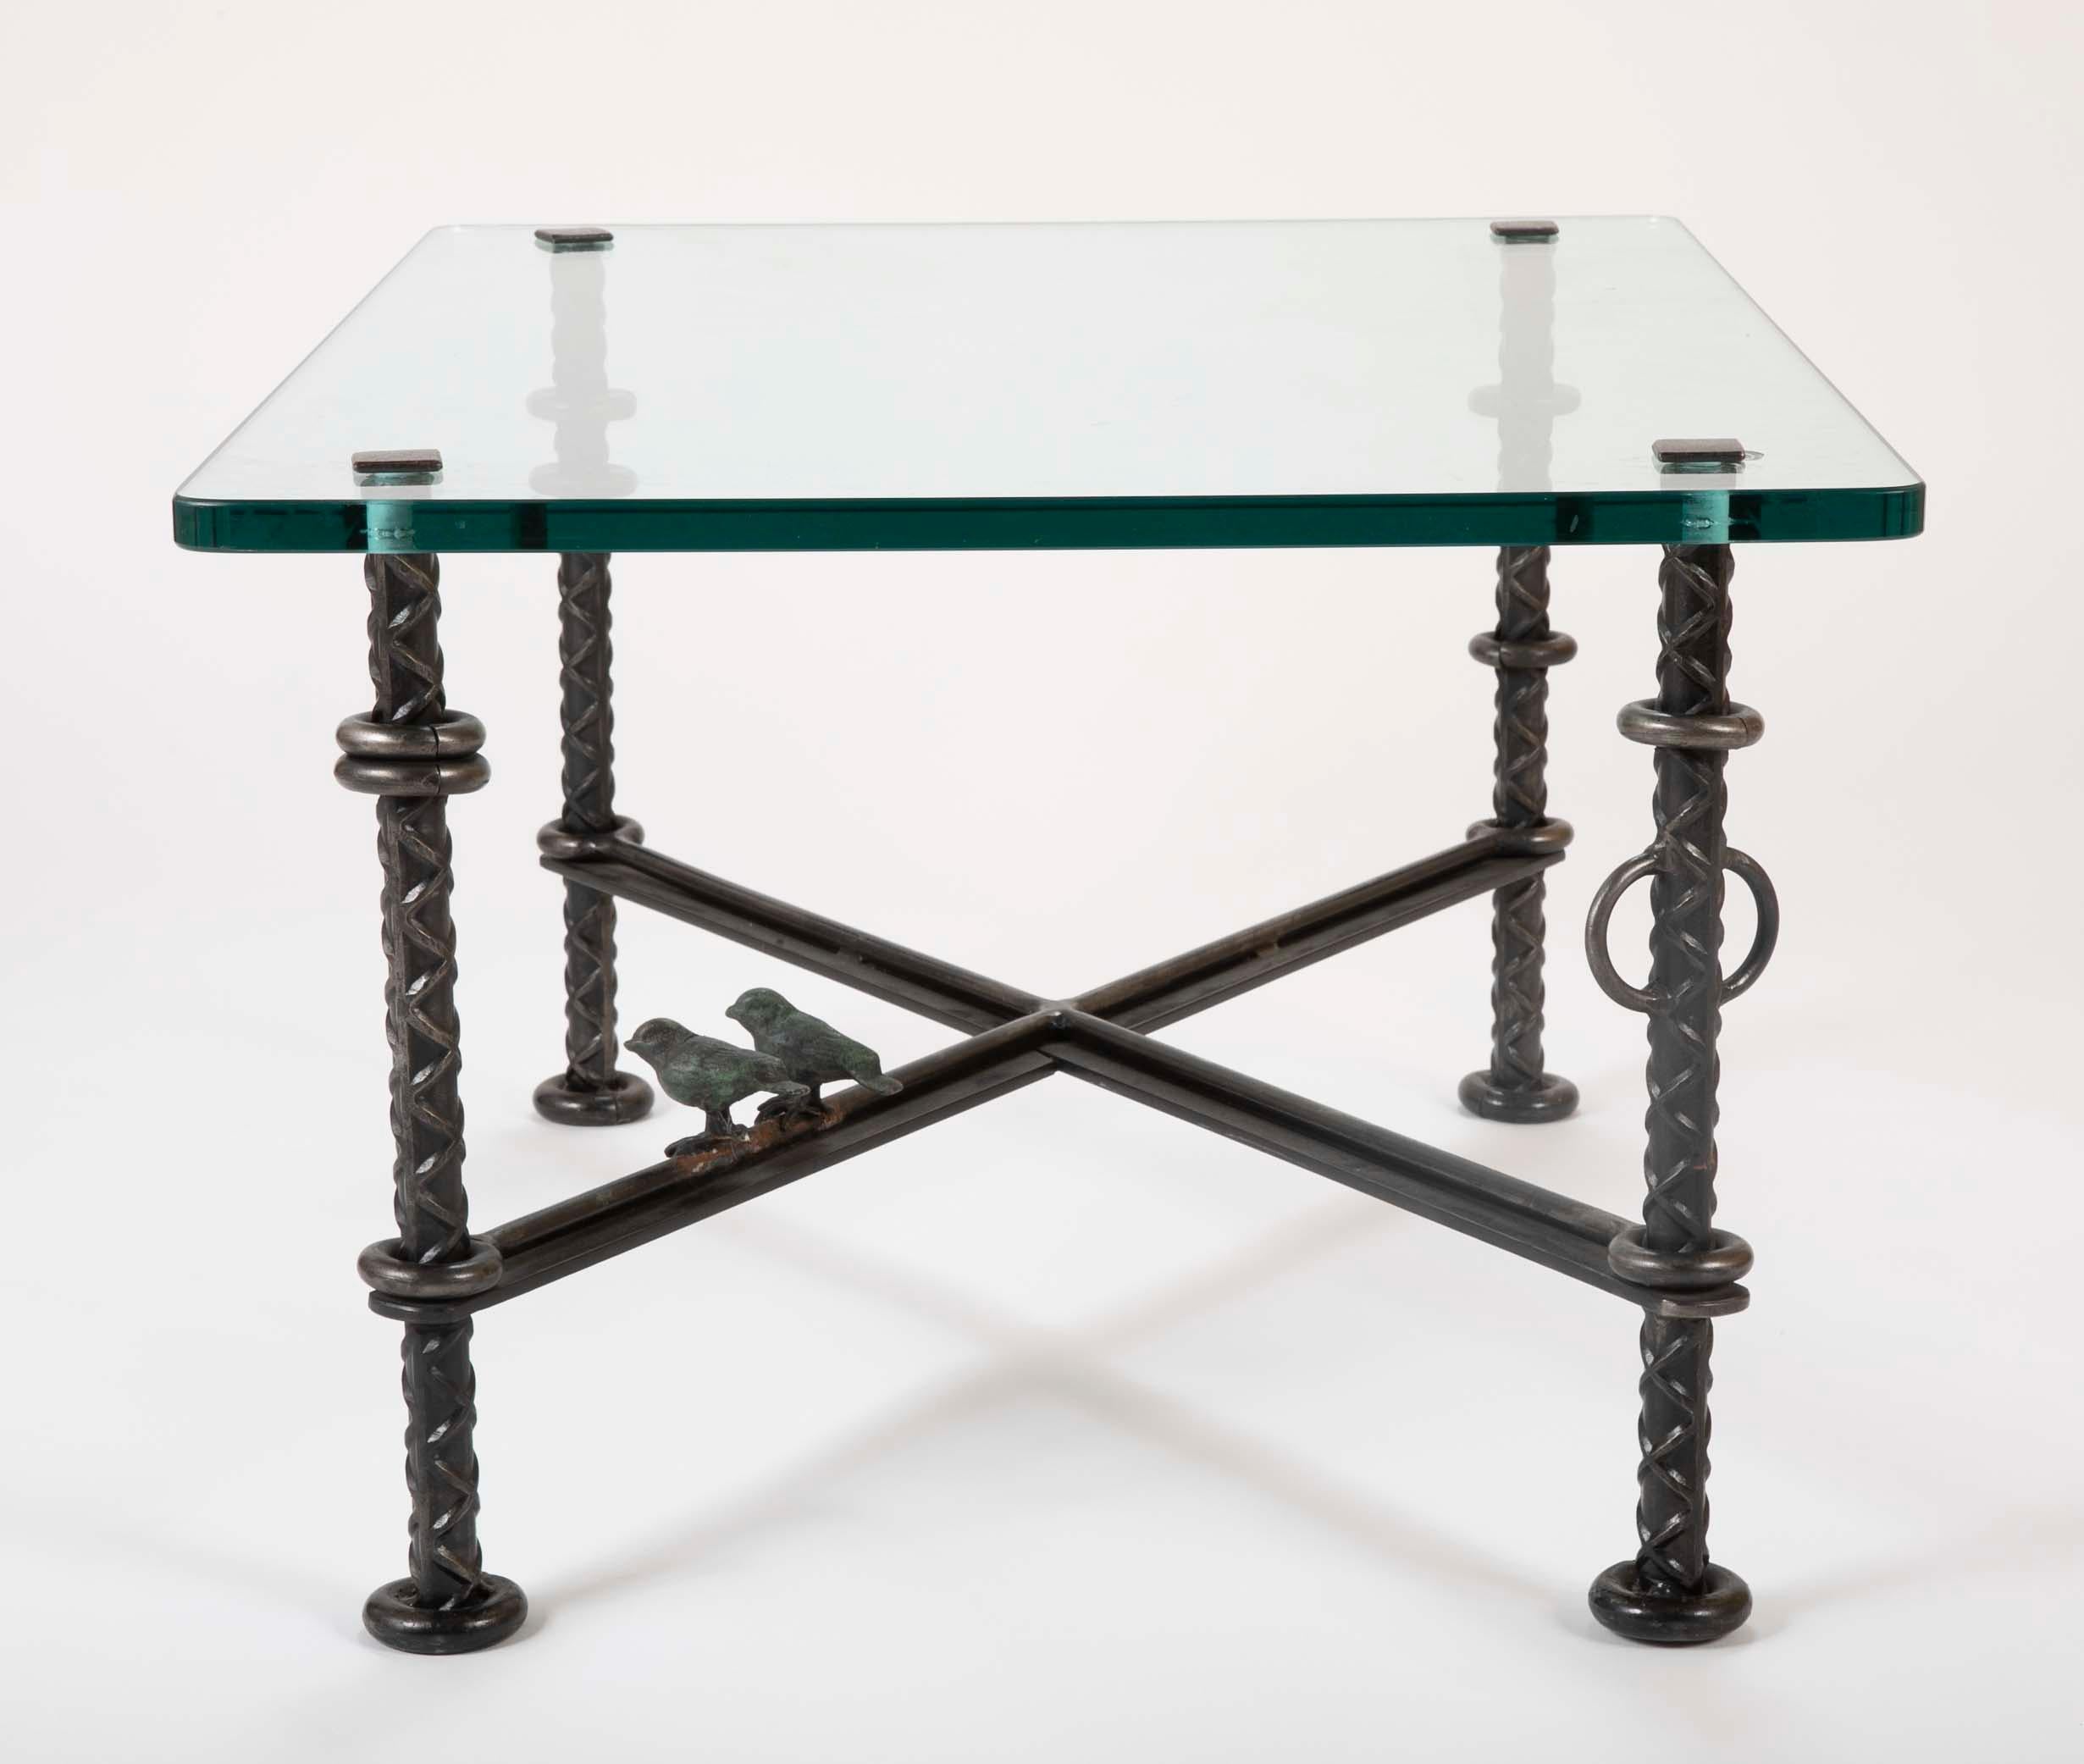 20th Century Patinated  Wrought Iron Coffee Table by Llana Goor